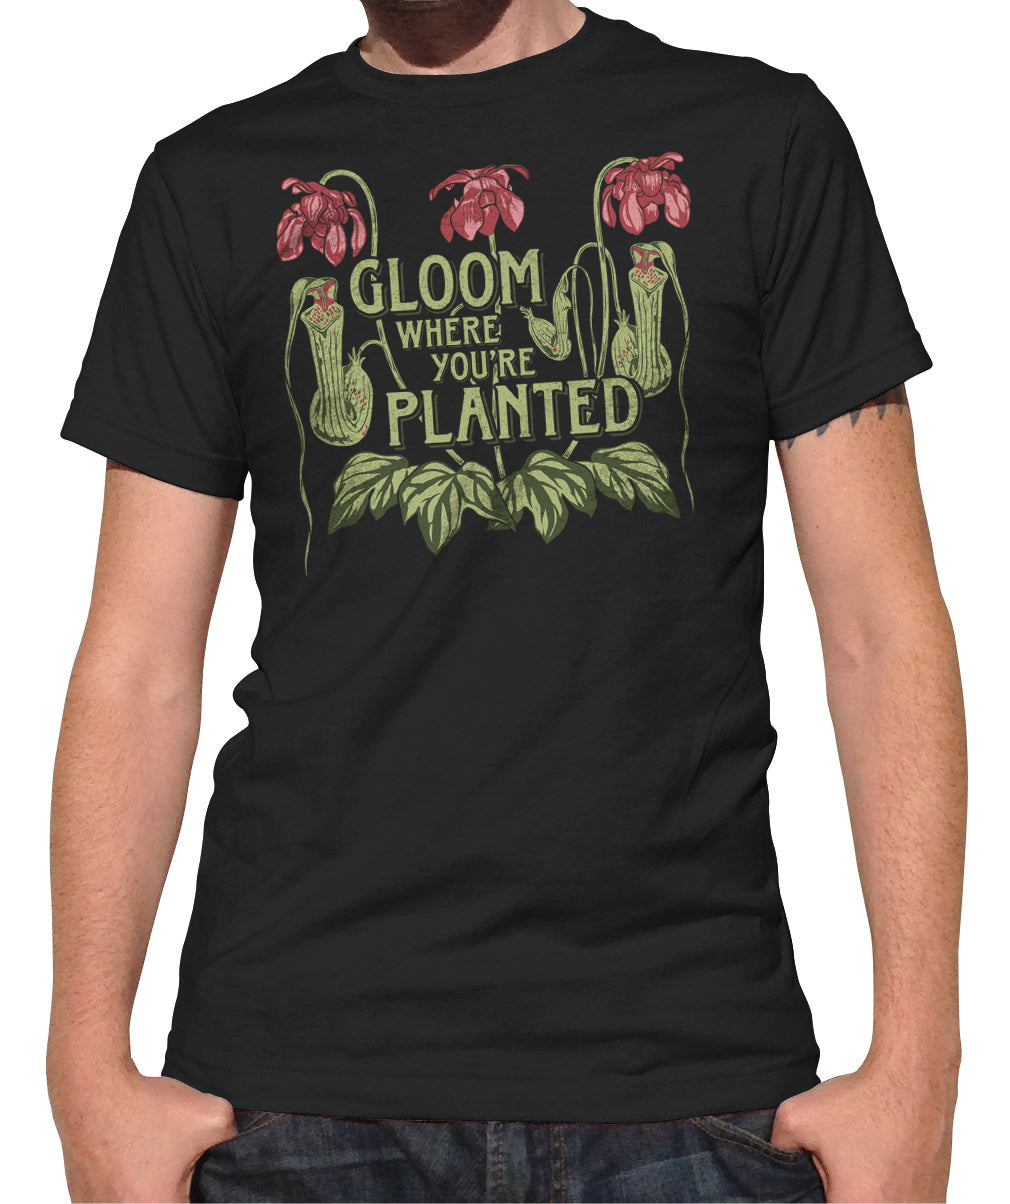 Men's Gloom Where You're Planted T-Shirt